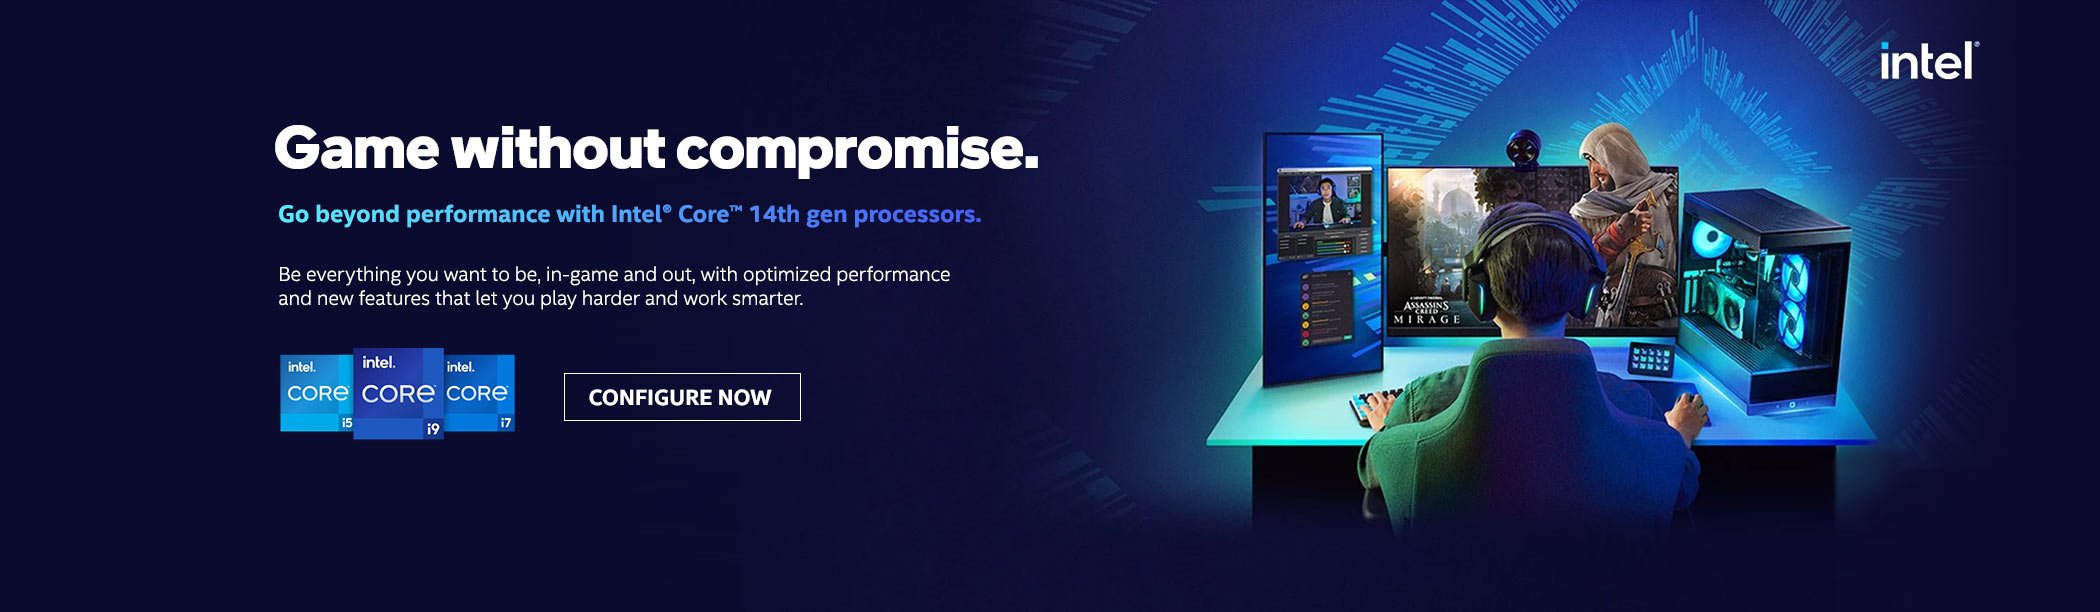 Go beyond performance with Intel® Core™ 14th gen processors.